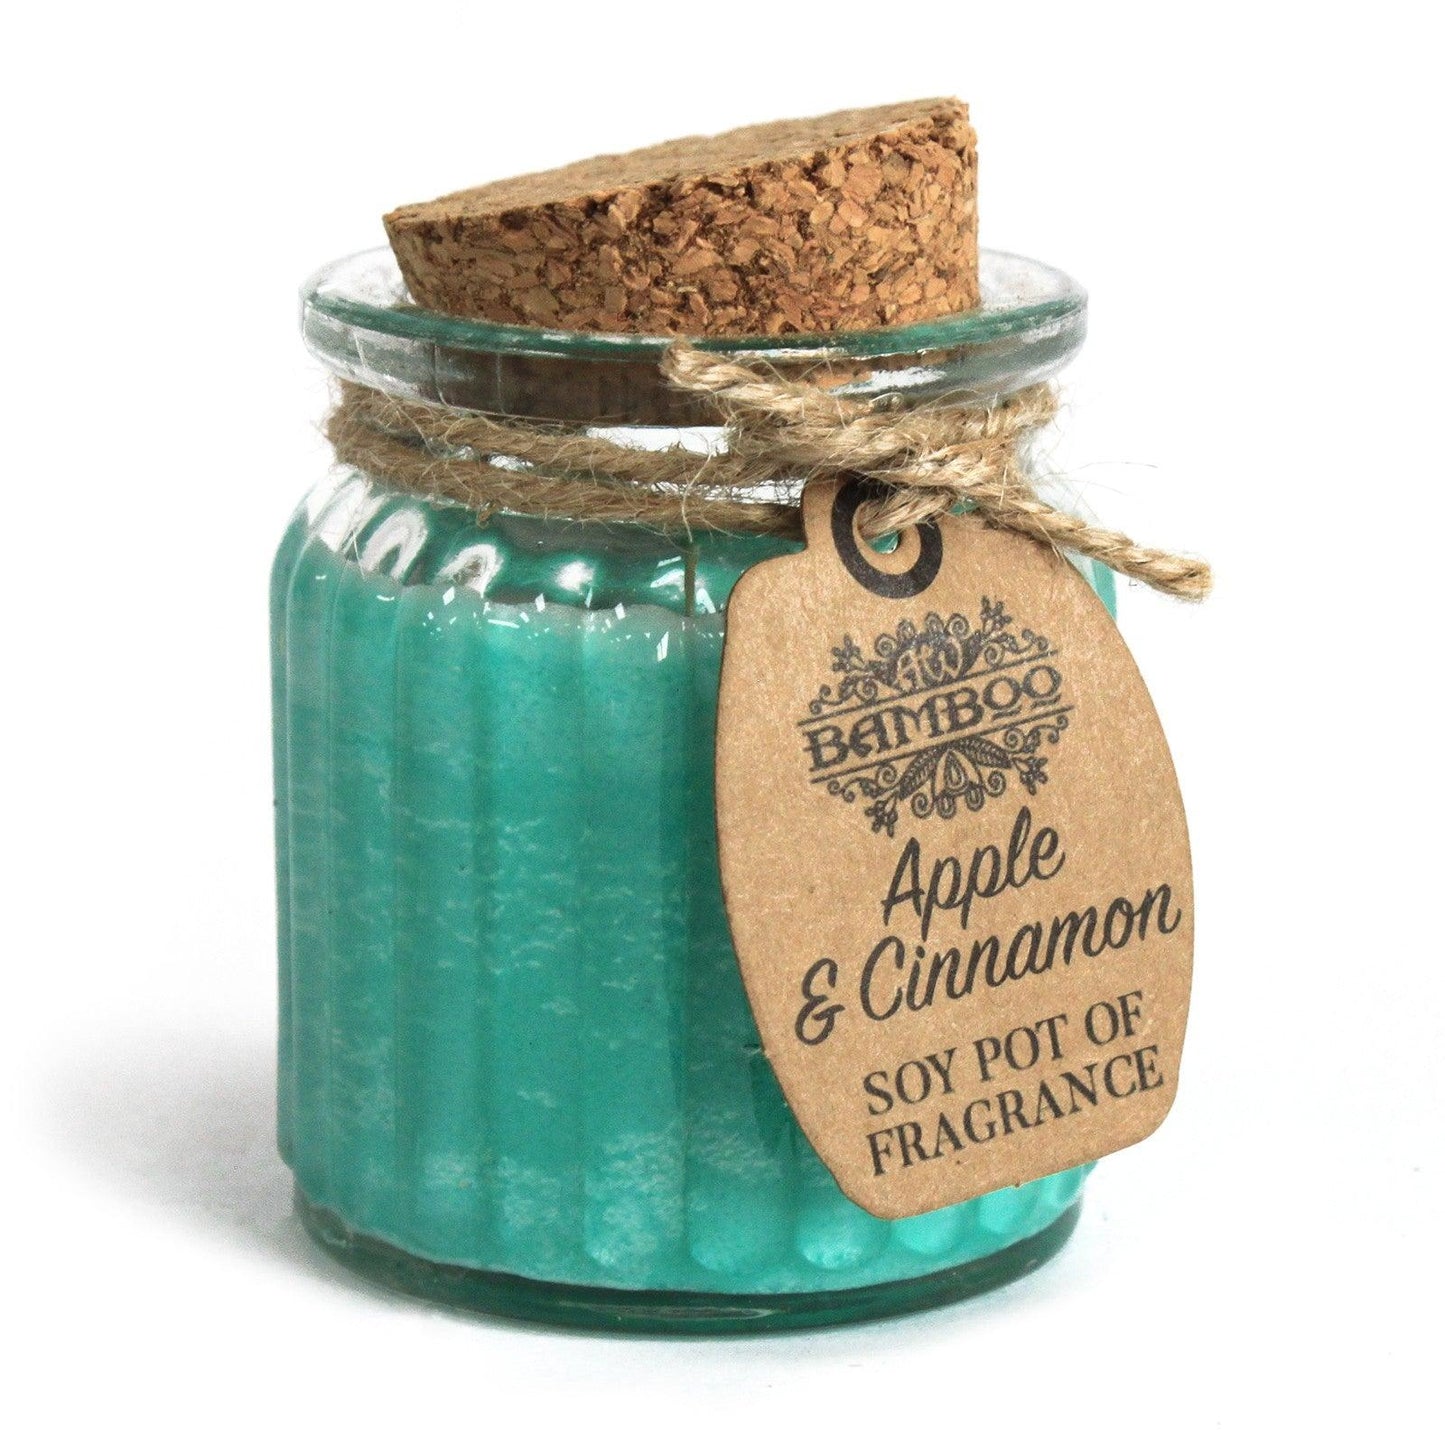 Apple & Cinnamon Soy Pot of Fragrance Candle